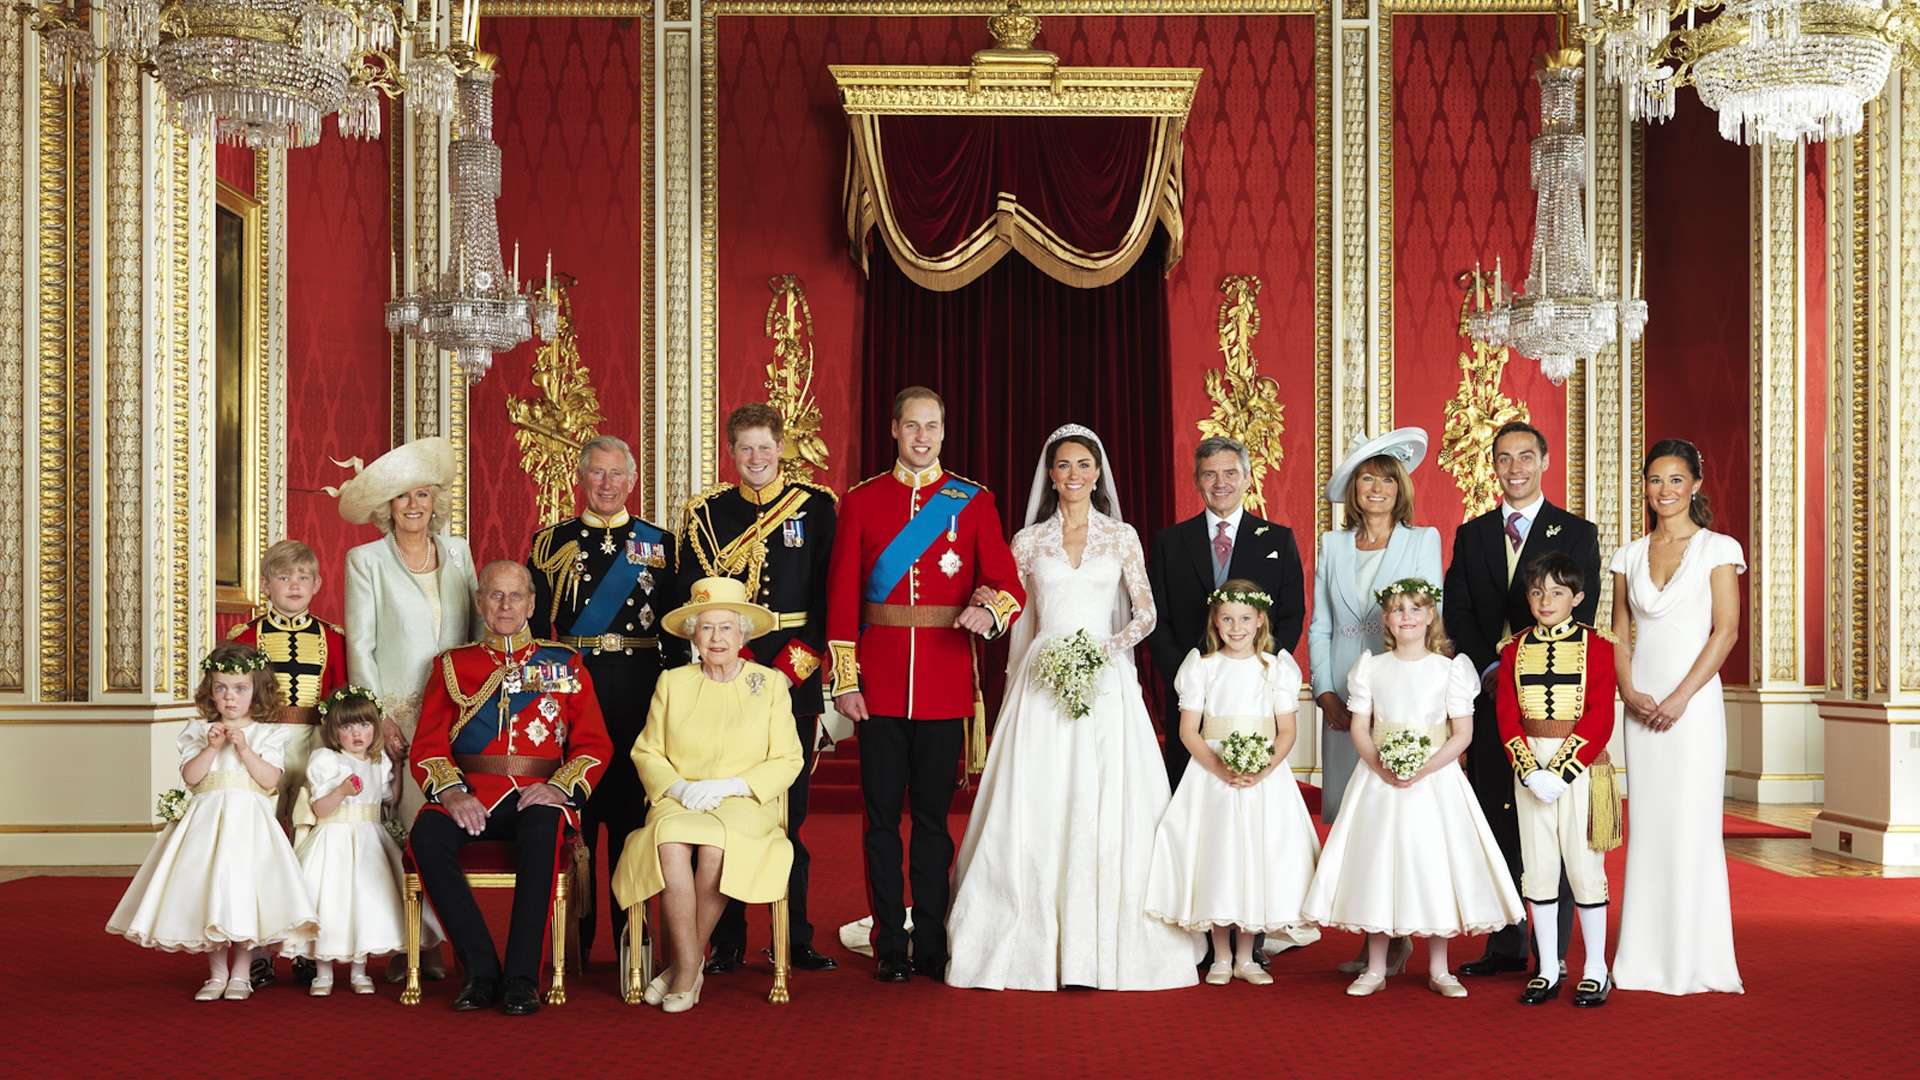 Royal Family Picture for 1920 x 1080 HDTV 1080p resolution